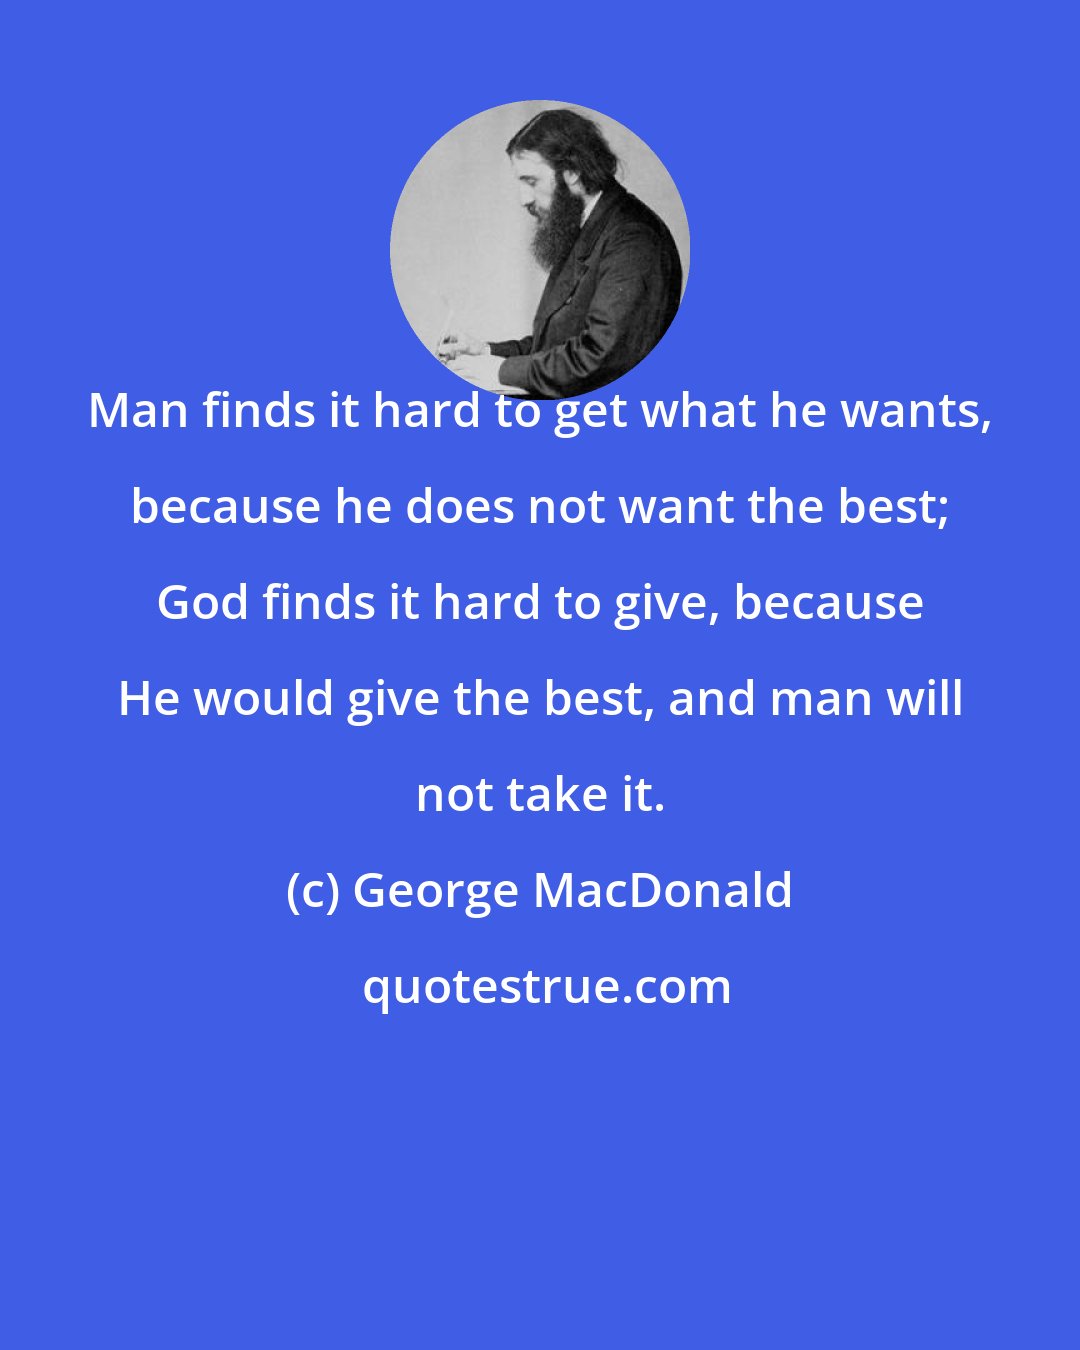 George MacDonald: Man finds it hard to get what he wants, because he does not want the best; God finds it hard to give, because He would give the best, and man will not take it.